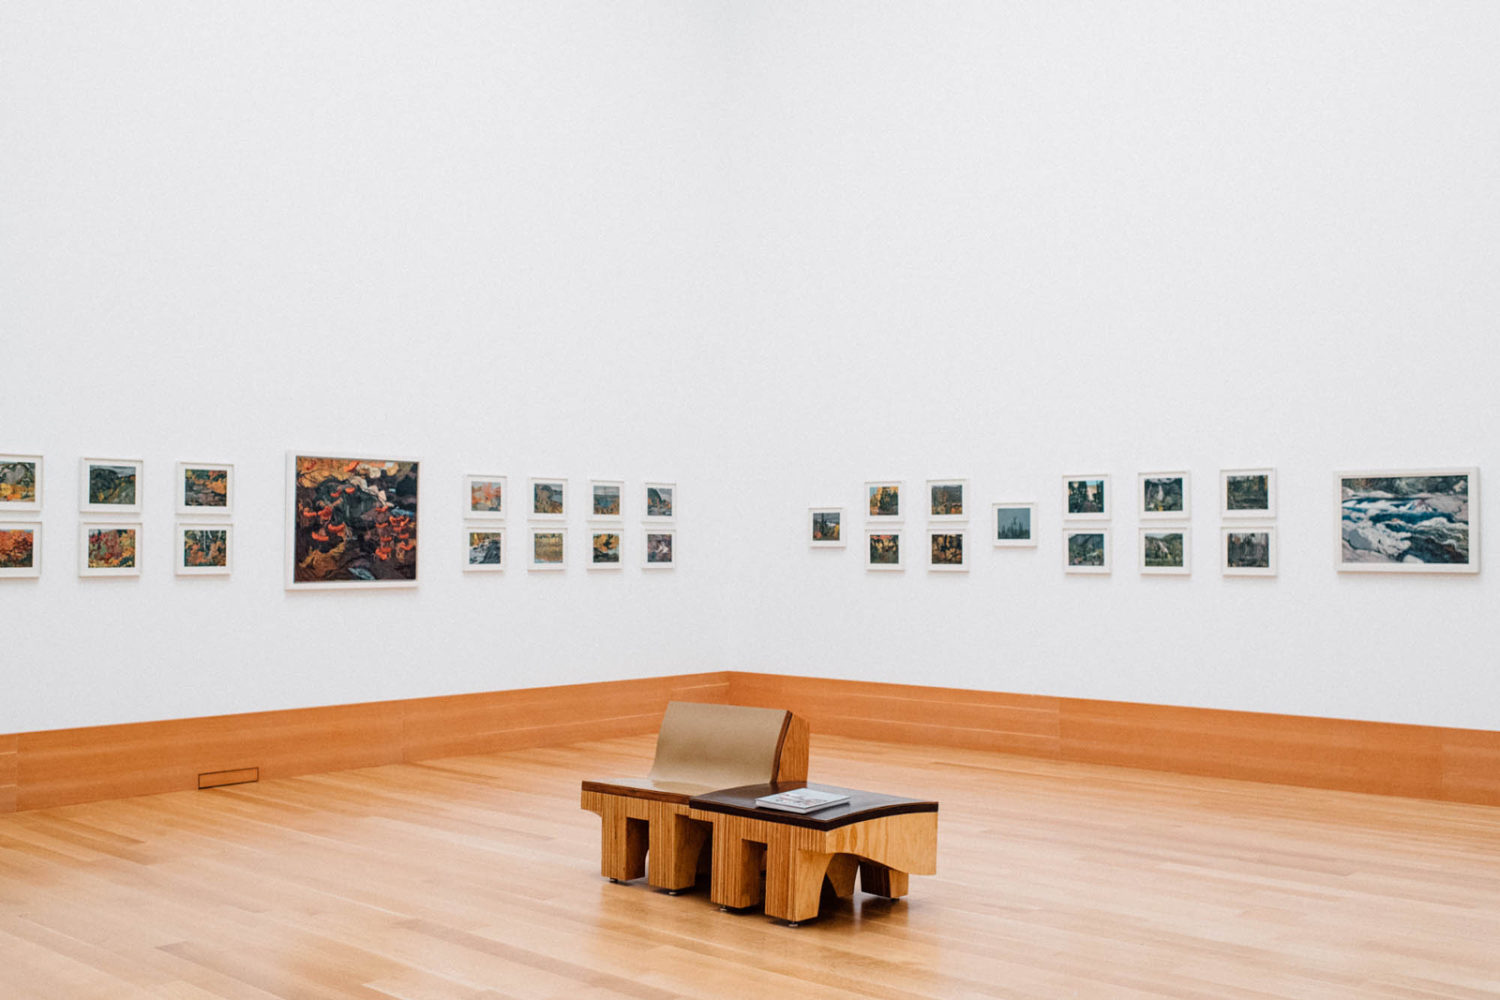 How to Respectfully Take Photos in Museums and Art Galleries